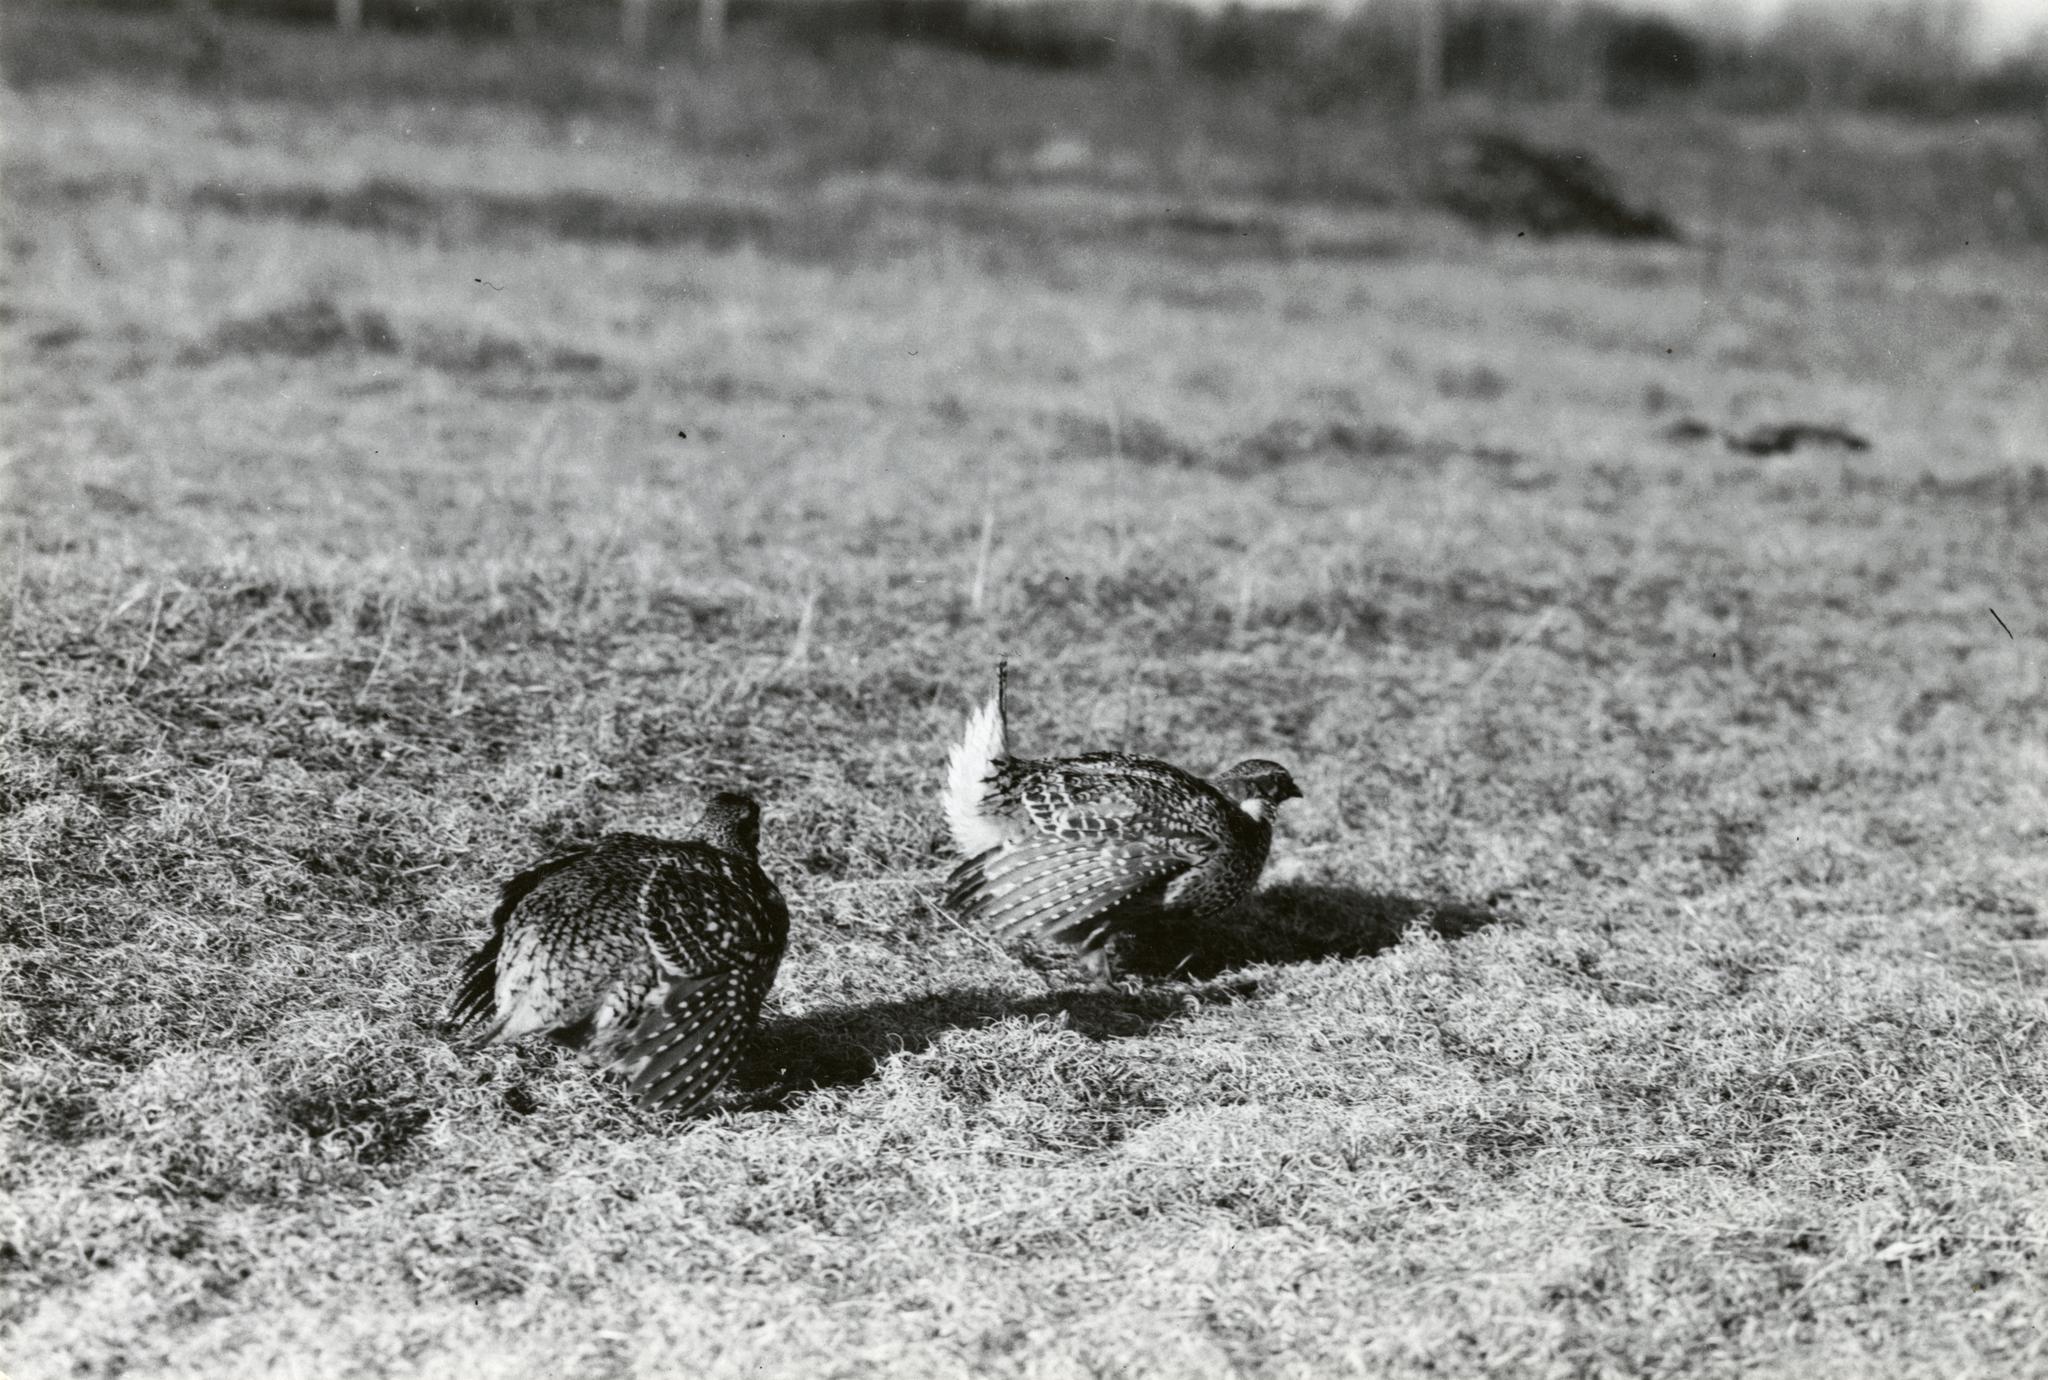 Sharp-tailed grouse dancing